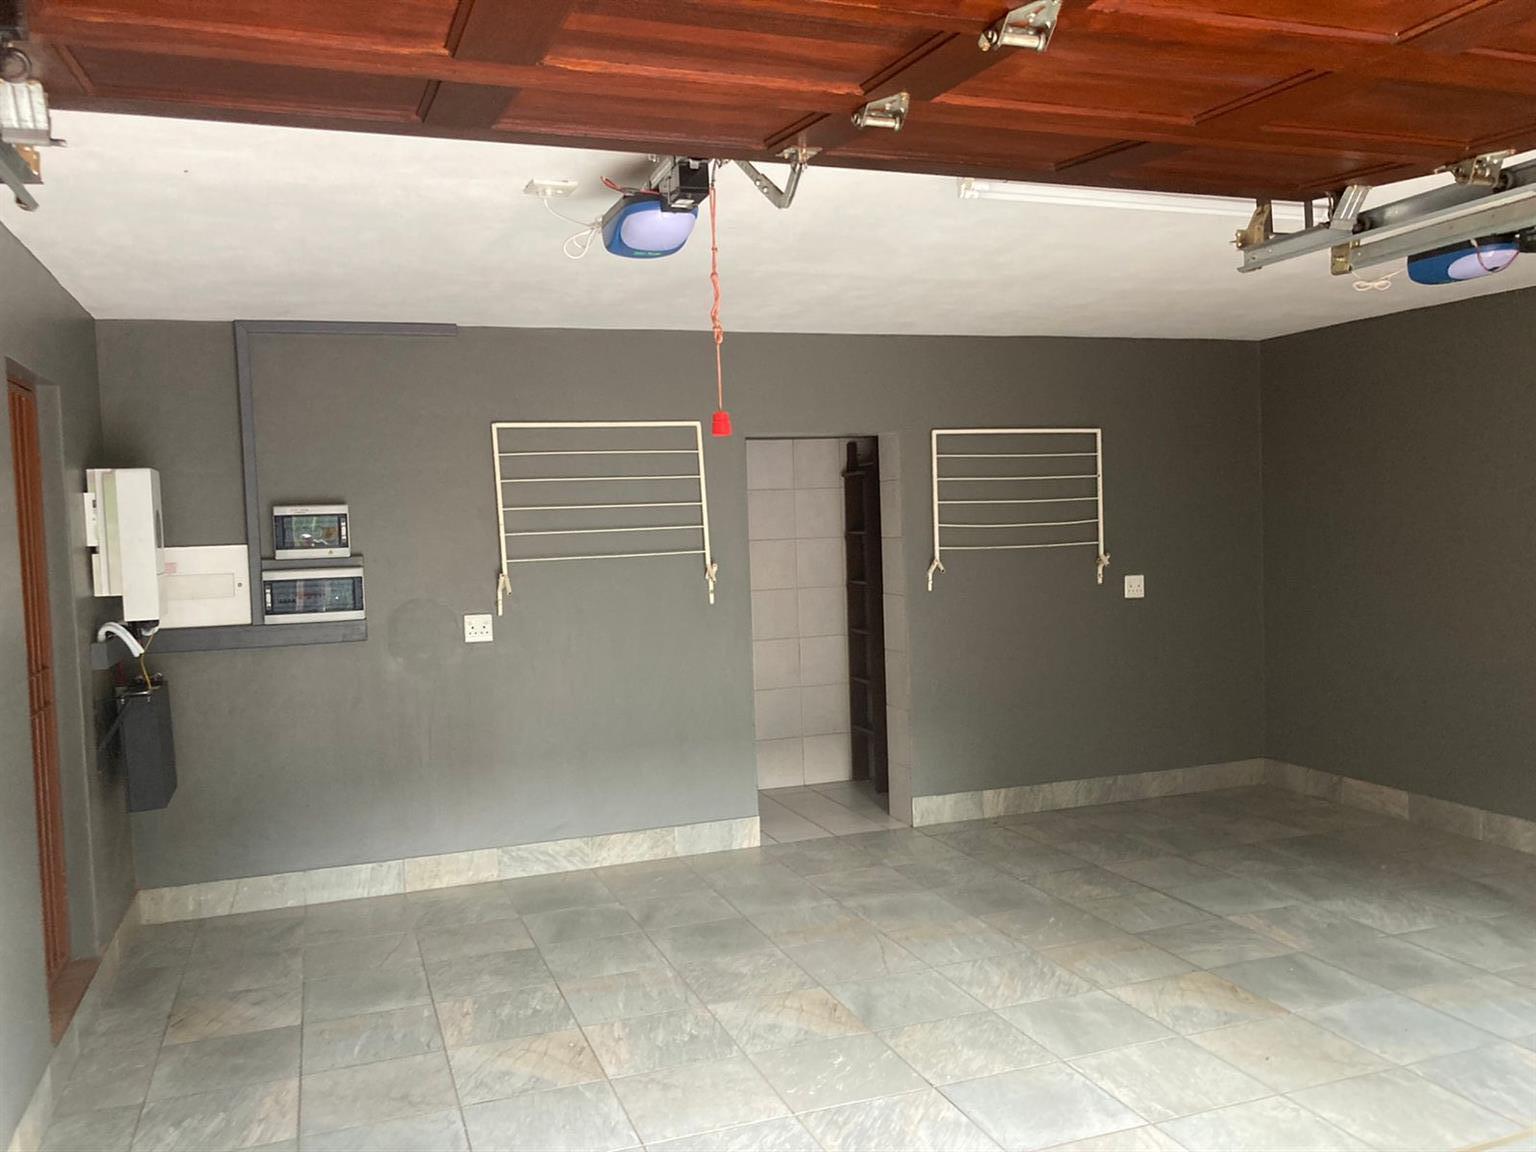 3 bedroom double Storey house for rent